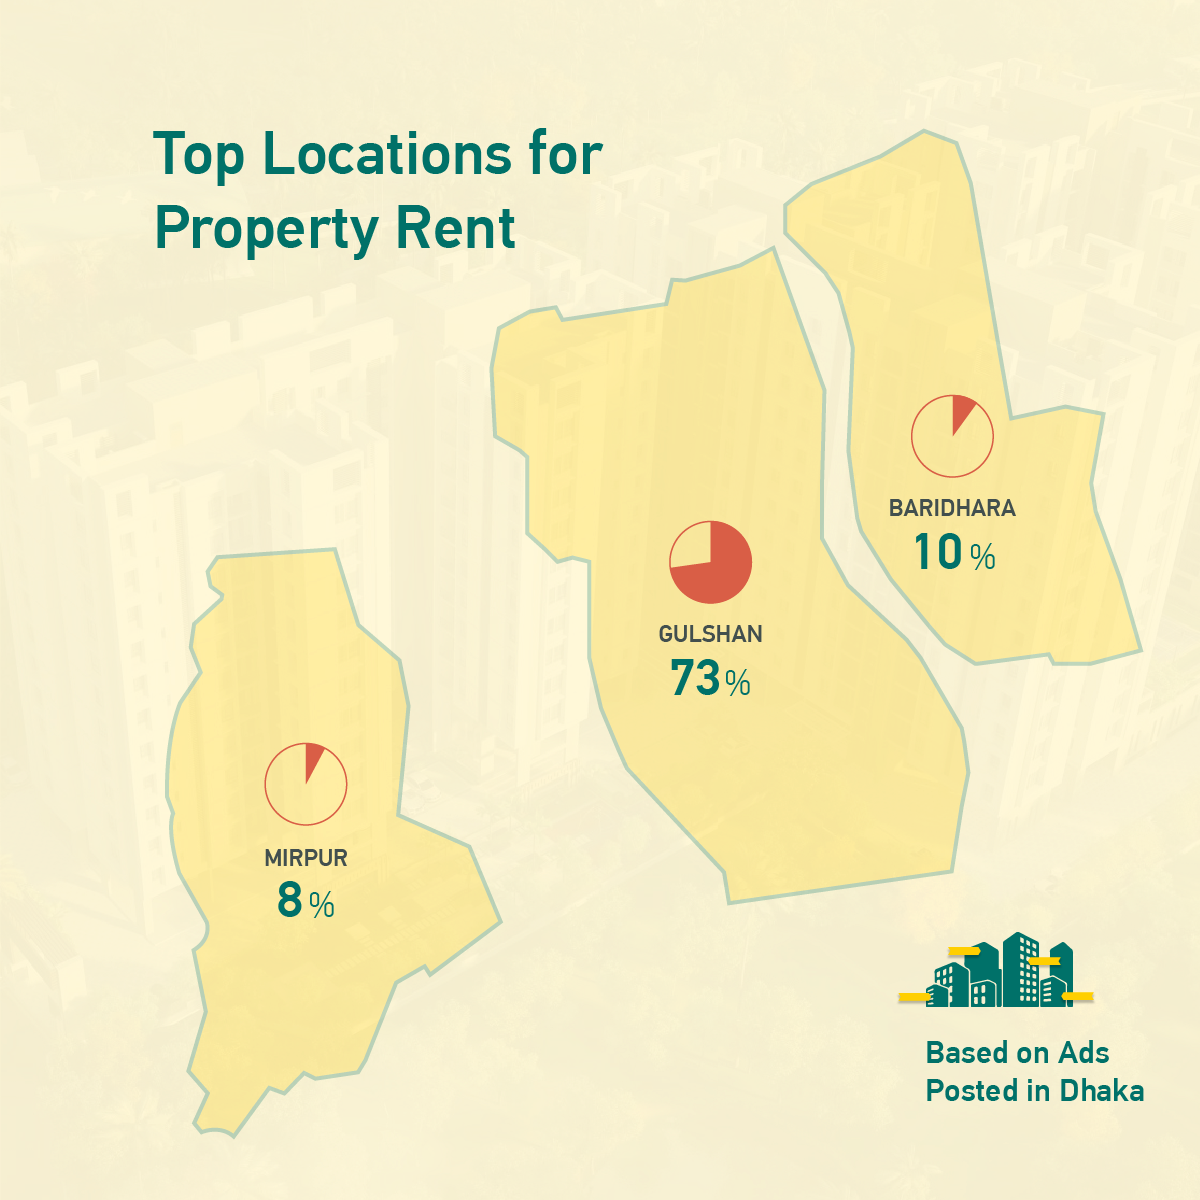 Top Locations for Property Rent